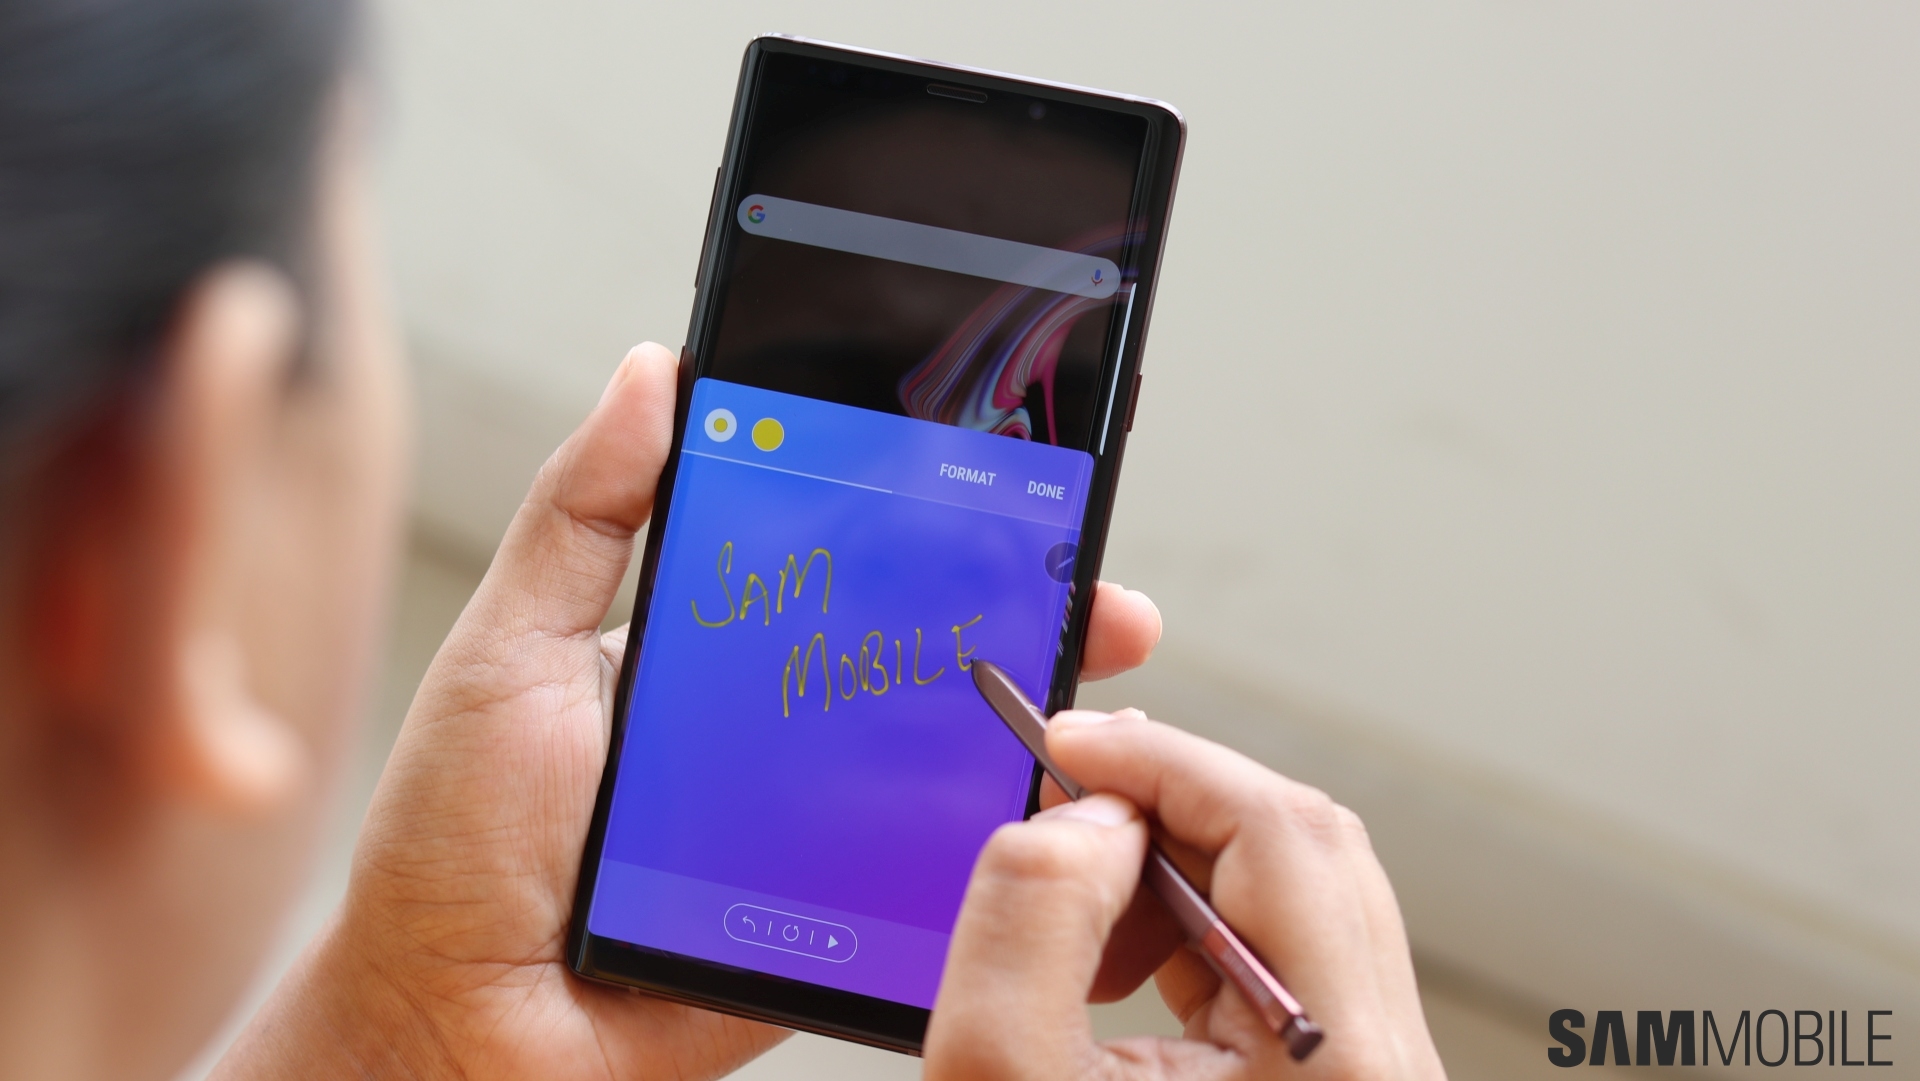 By-product Go mad Modernization Galaxy Note 9 and Galaxy S9 One UI 2.1 update is now in development -  SamMobile